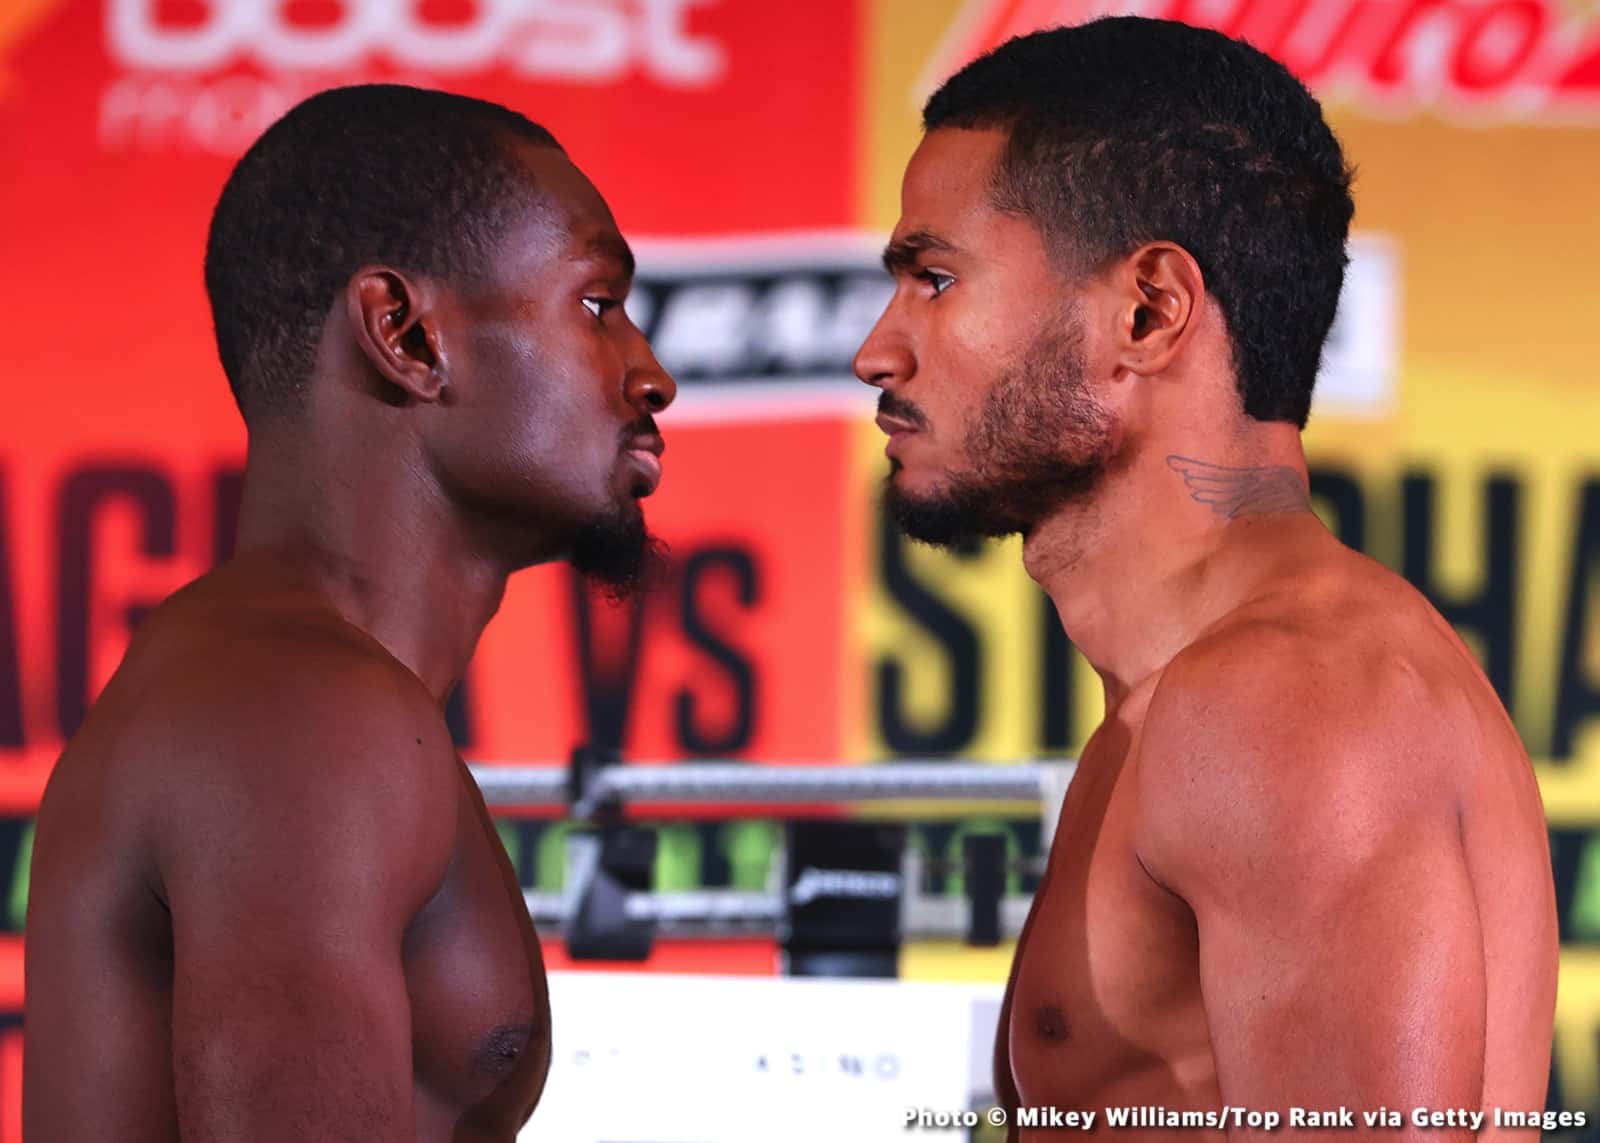 Ajagba vs. Shaw: Top Rank on ESPN Card Features Good Mix of 50-50’s